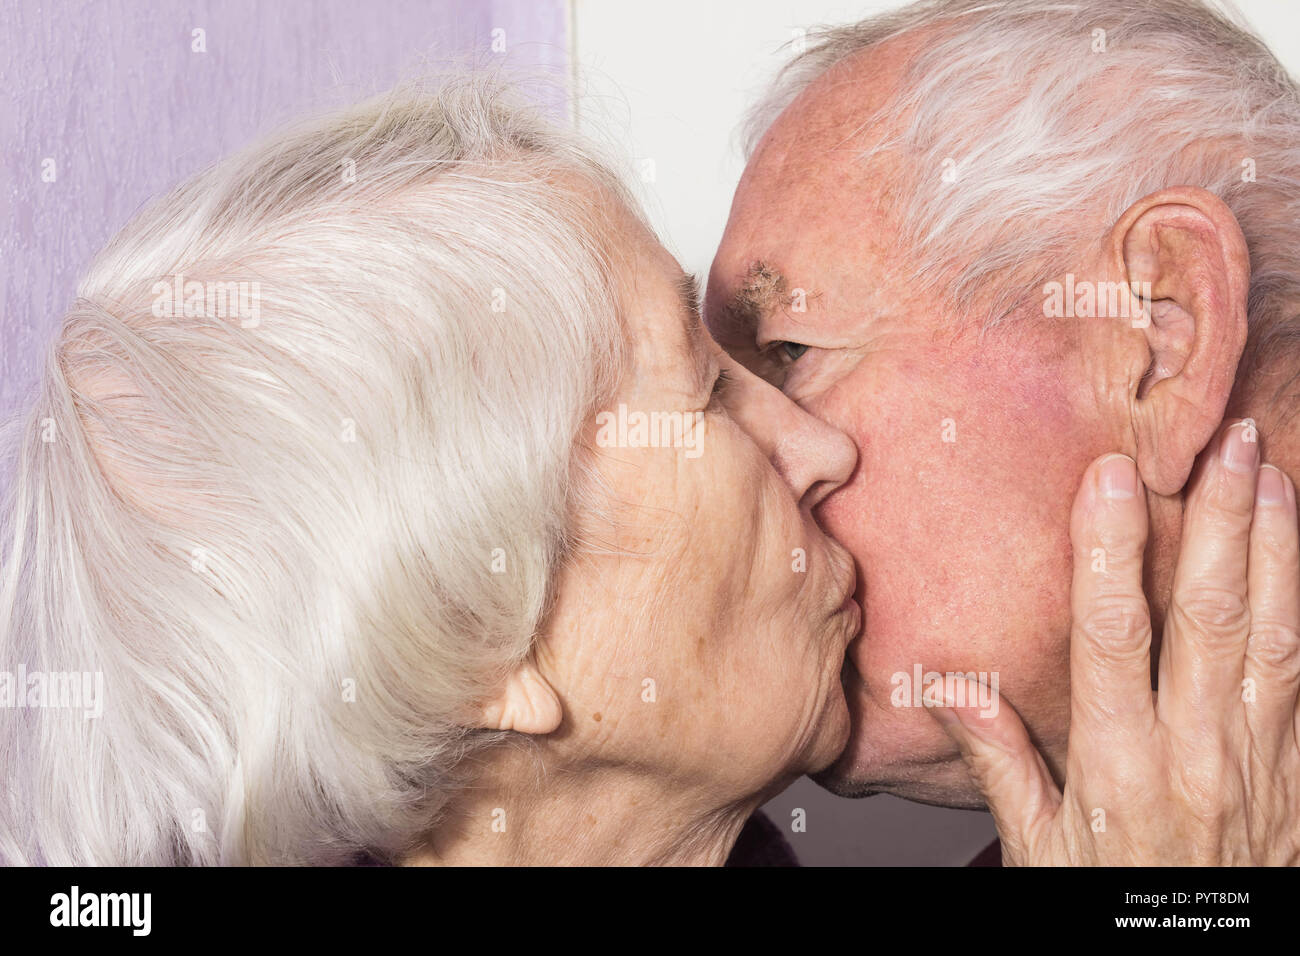 Old Man Kiss Young High Resolution Stock Photography and Images - Alamy